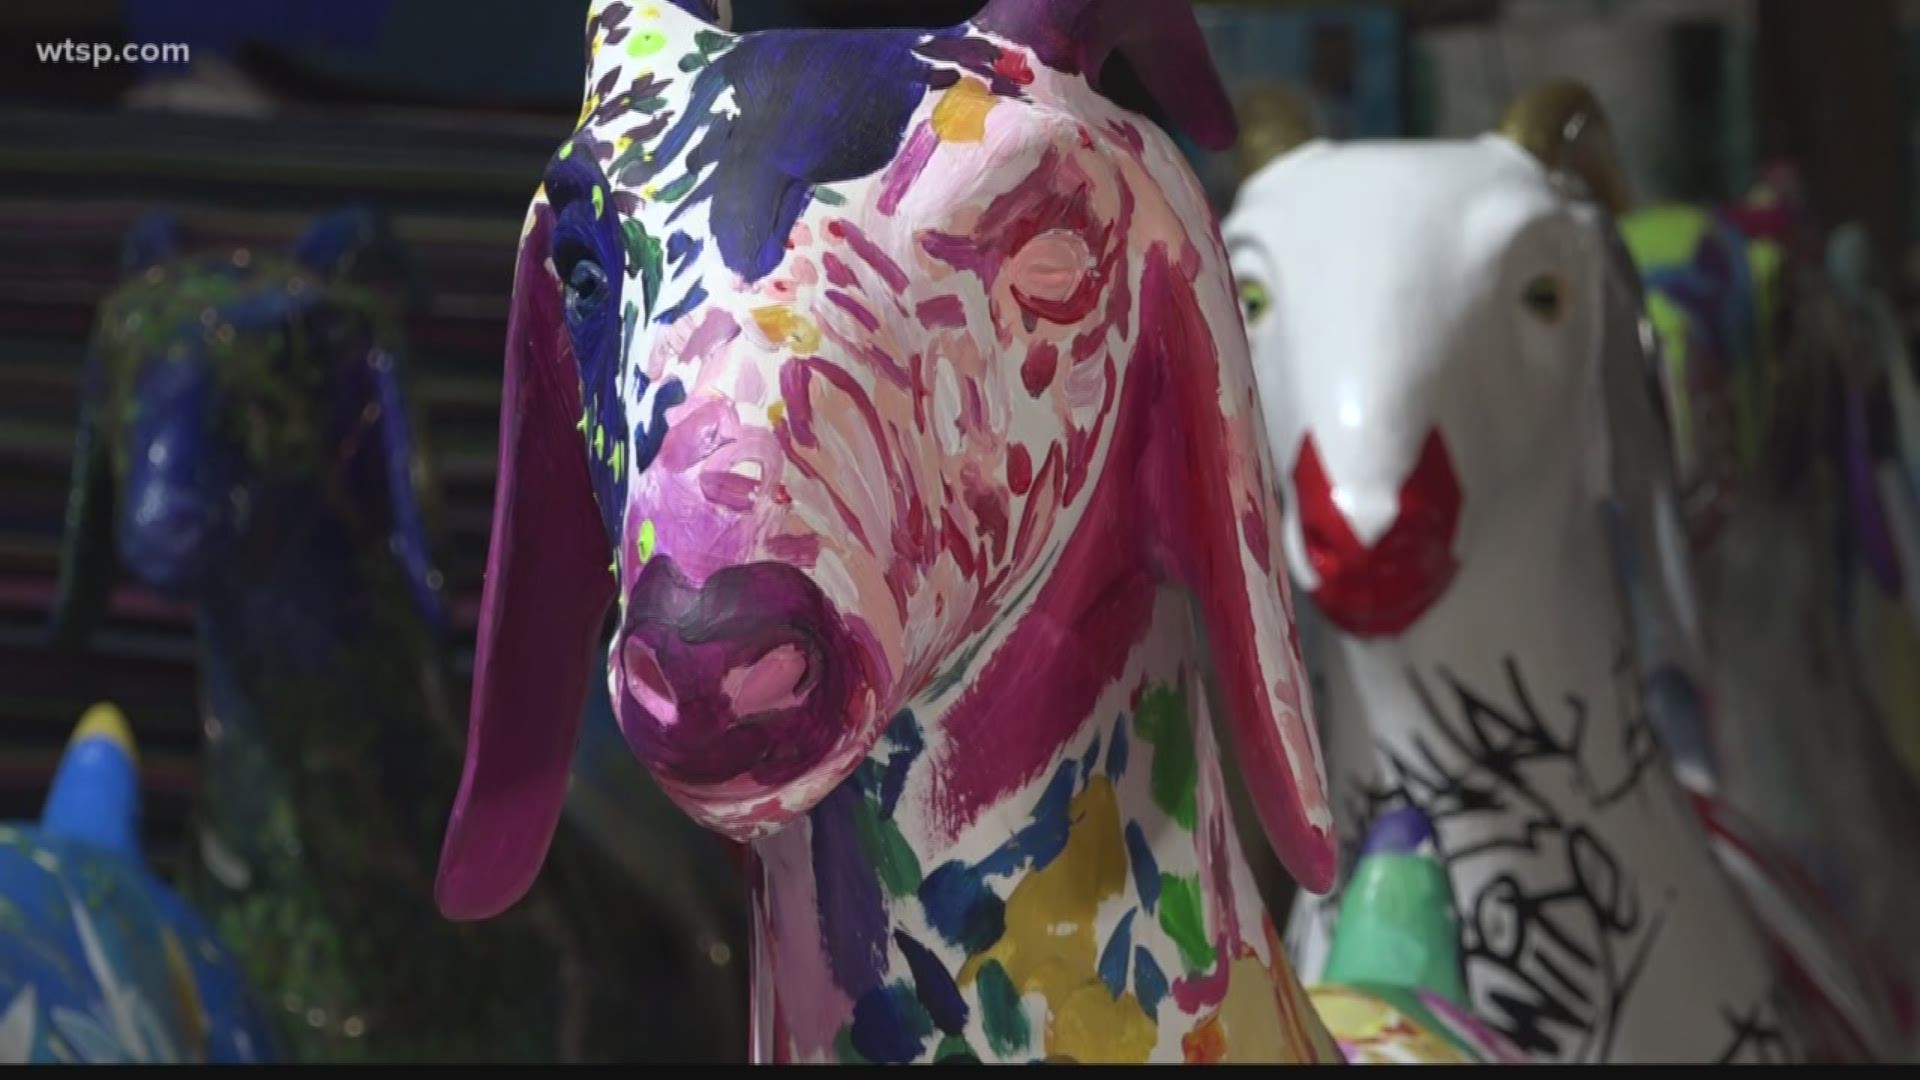 Project G.O.A.T. will auction off 55 goat statues in 2021 at Super Bowl 55 in Tampa. Money raised will be given to groups who fight human trafficking.